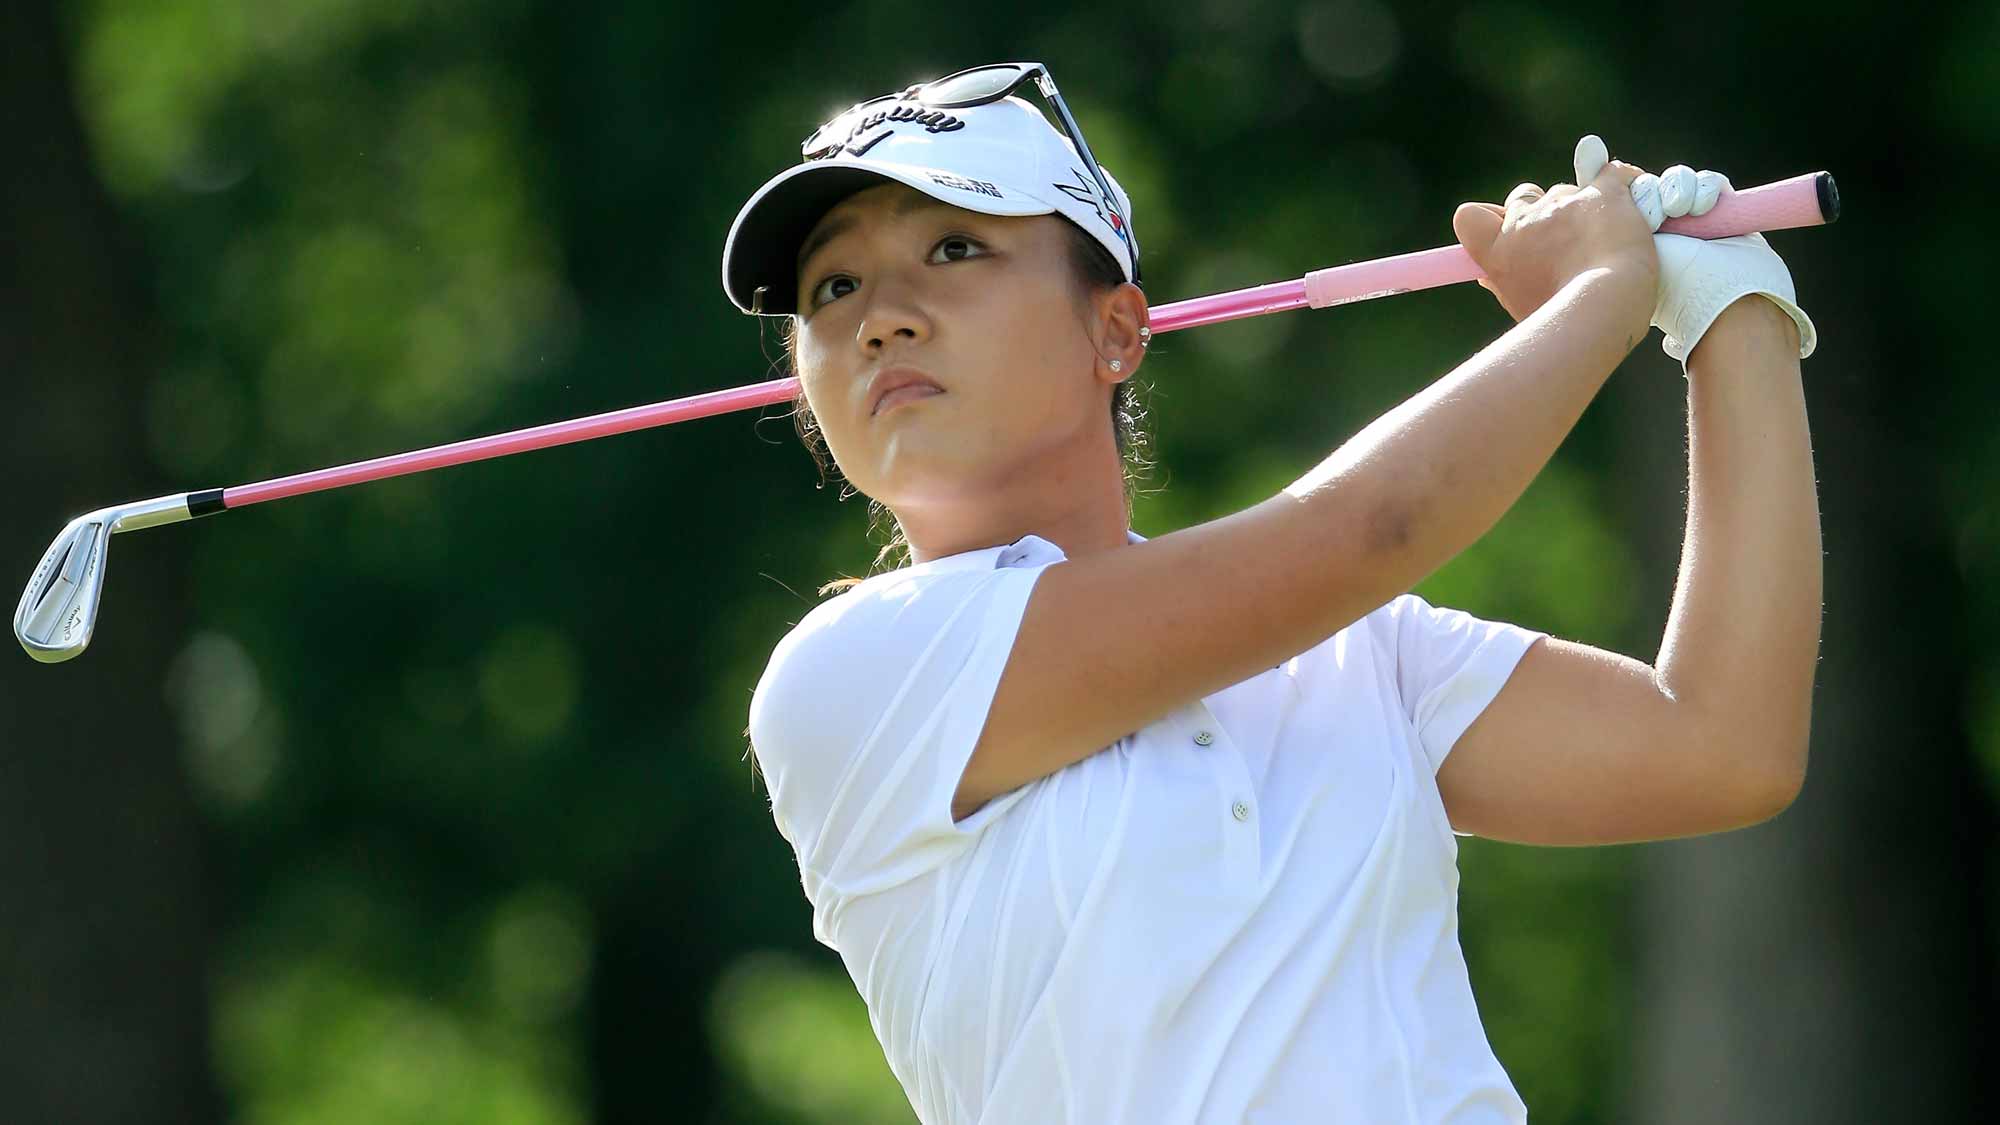 Lydia Ko of New Zealand plays a shot on the third hole during the first round of the Walmart NW Arkansas Championship Presented by P&G at Pinnacle Country Club